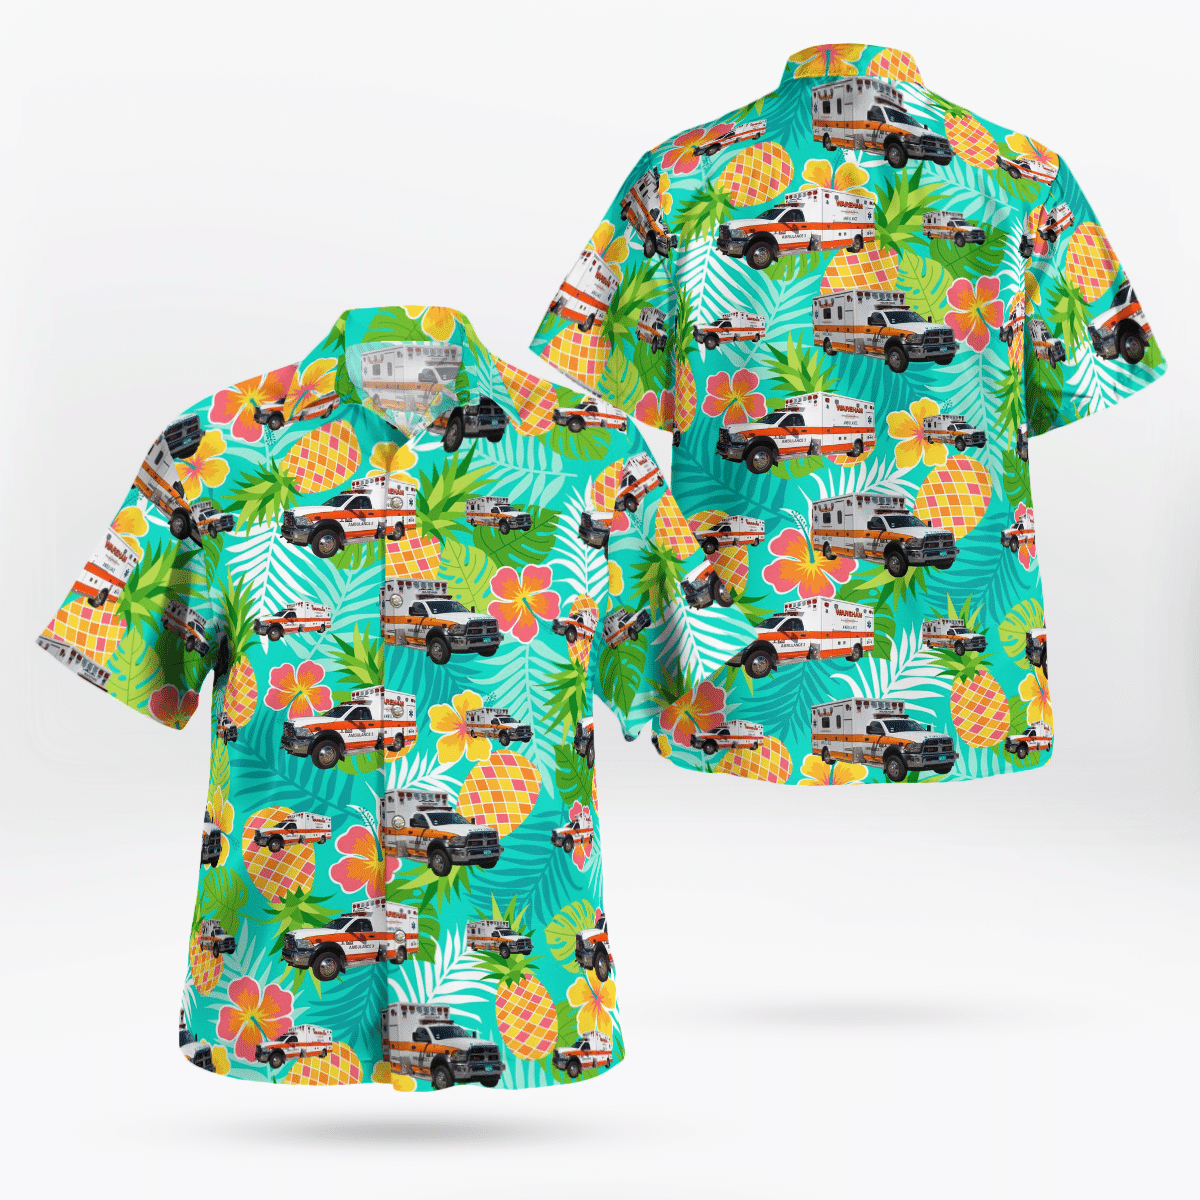 If you are in need of a new summertime look, pick up this Hawaiian shirt 62